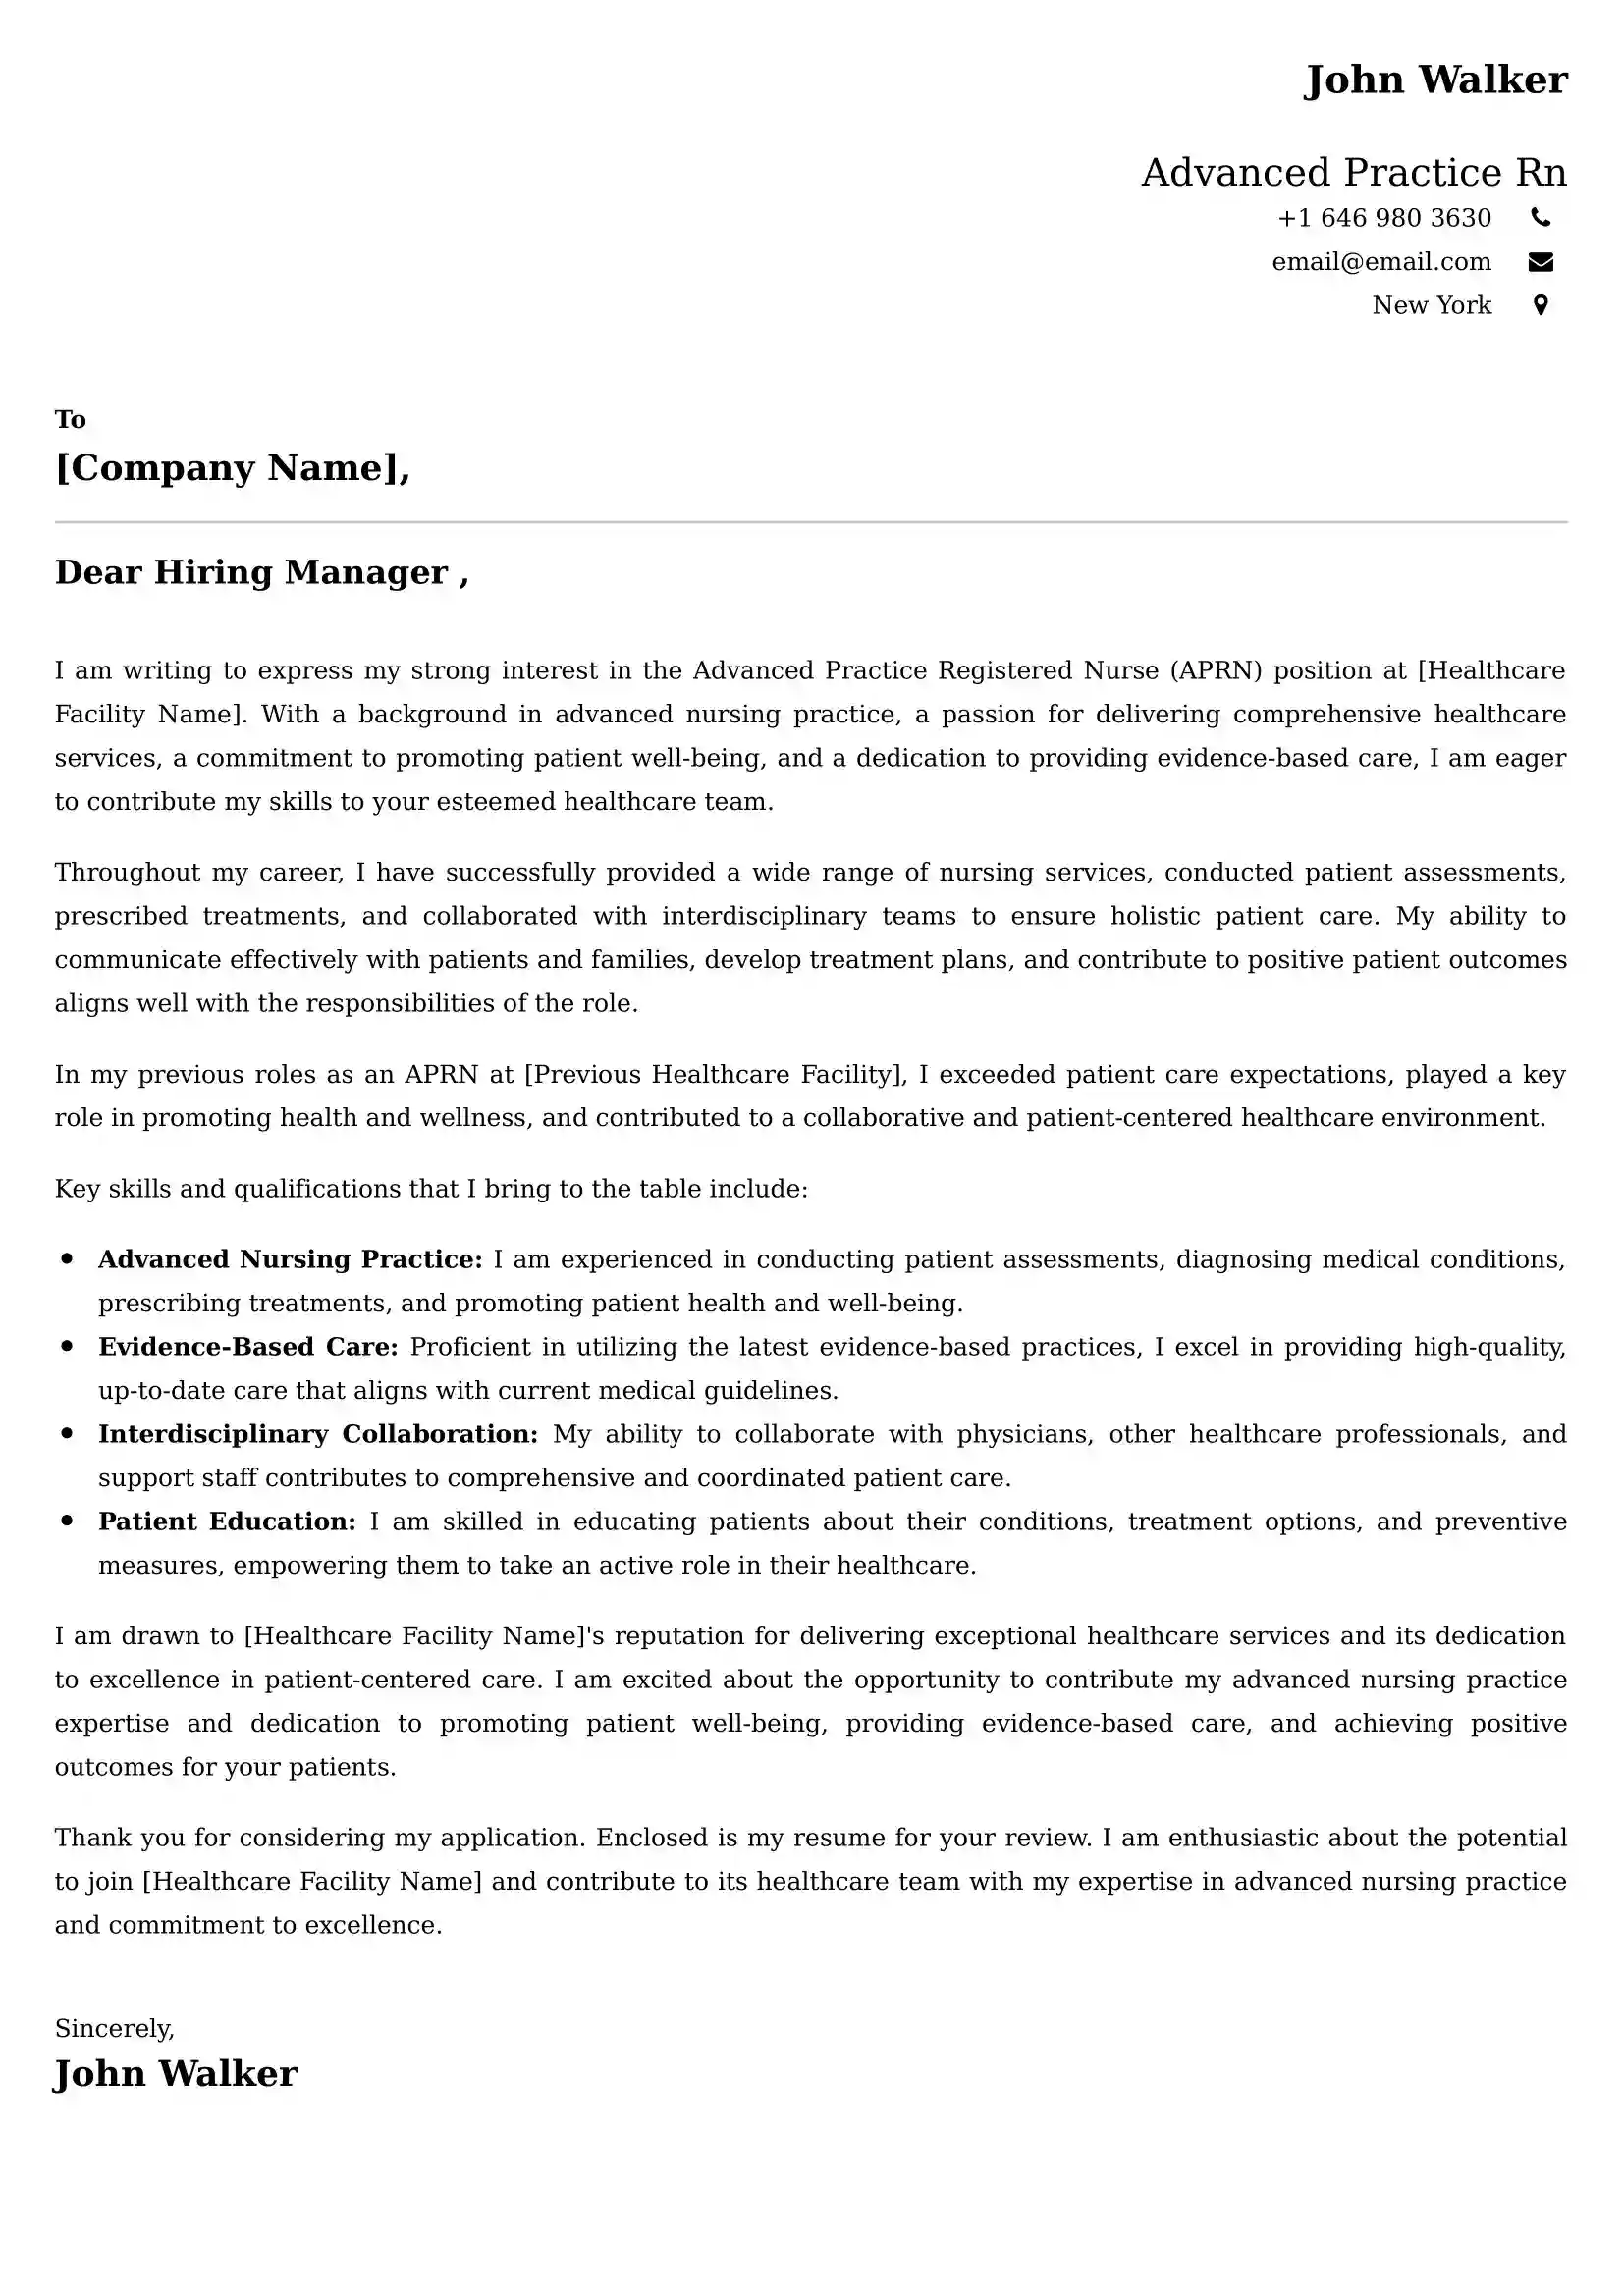 Advanced Practice Rn Cover Letter Examples UK - Tips and Guide